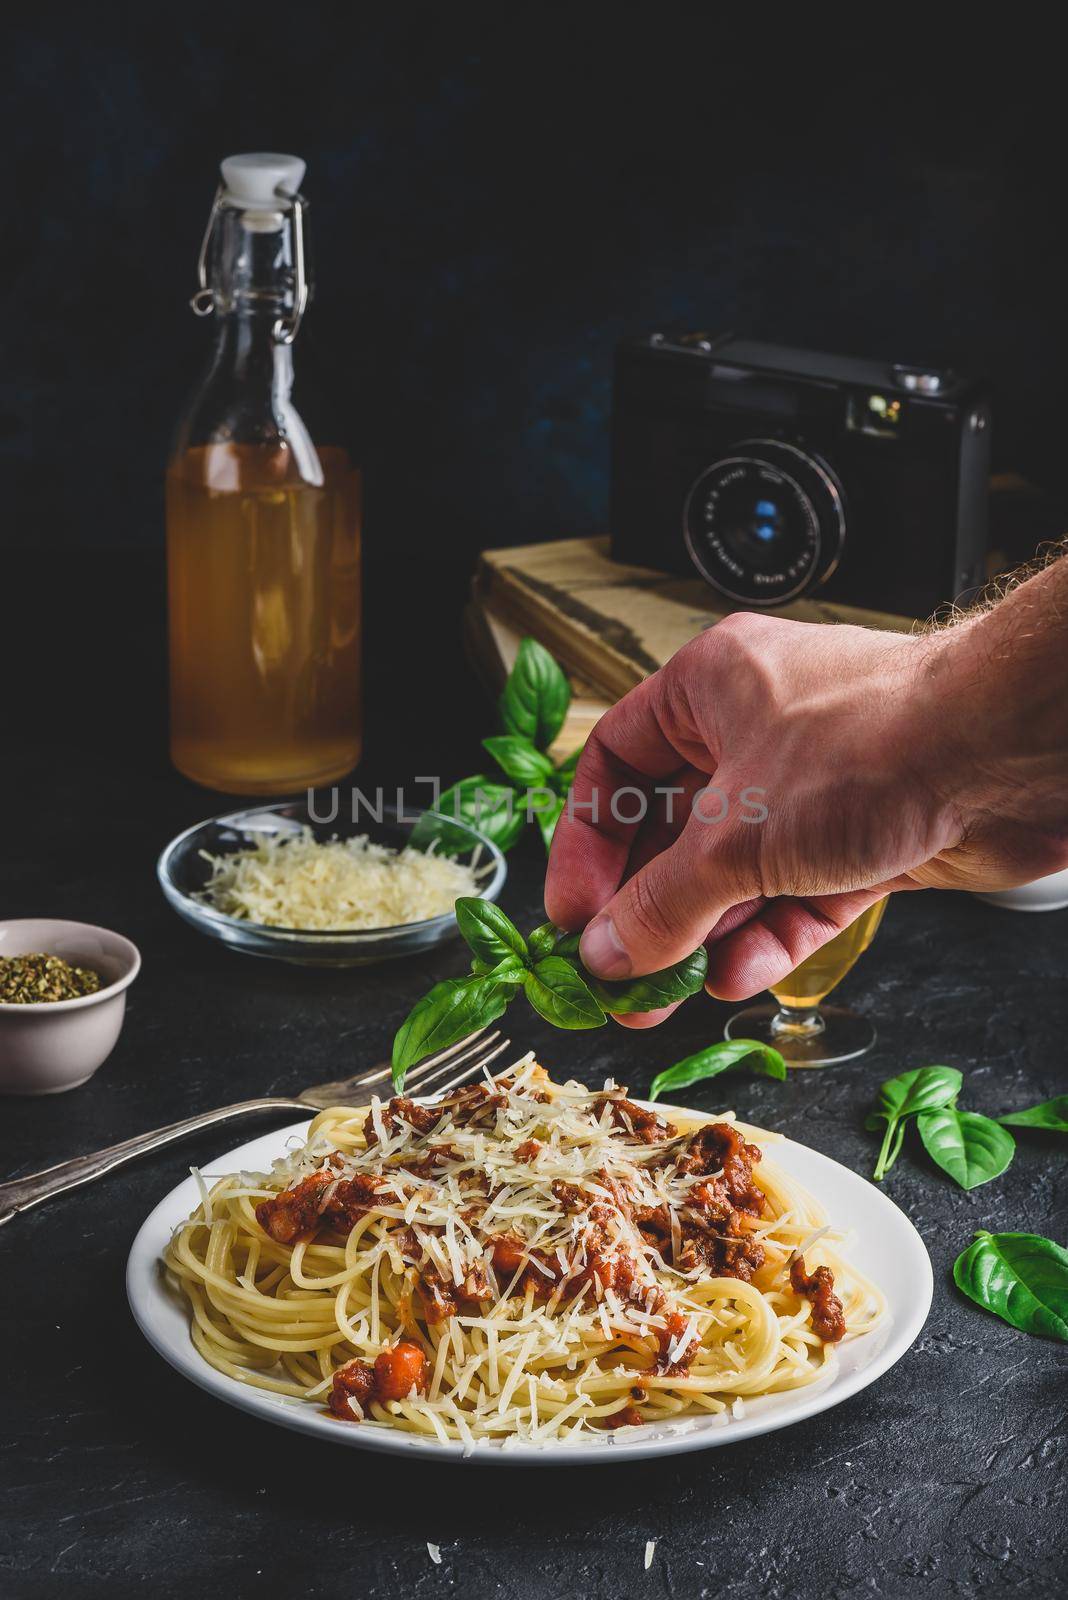 Spaghetti with bolognese sauce and grated parmesan cheese by Seva_blsv